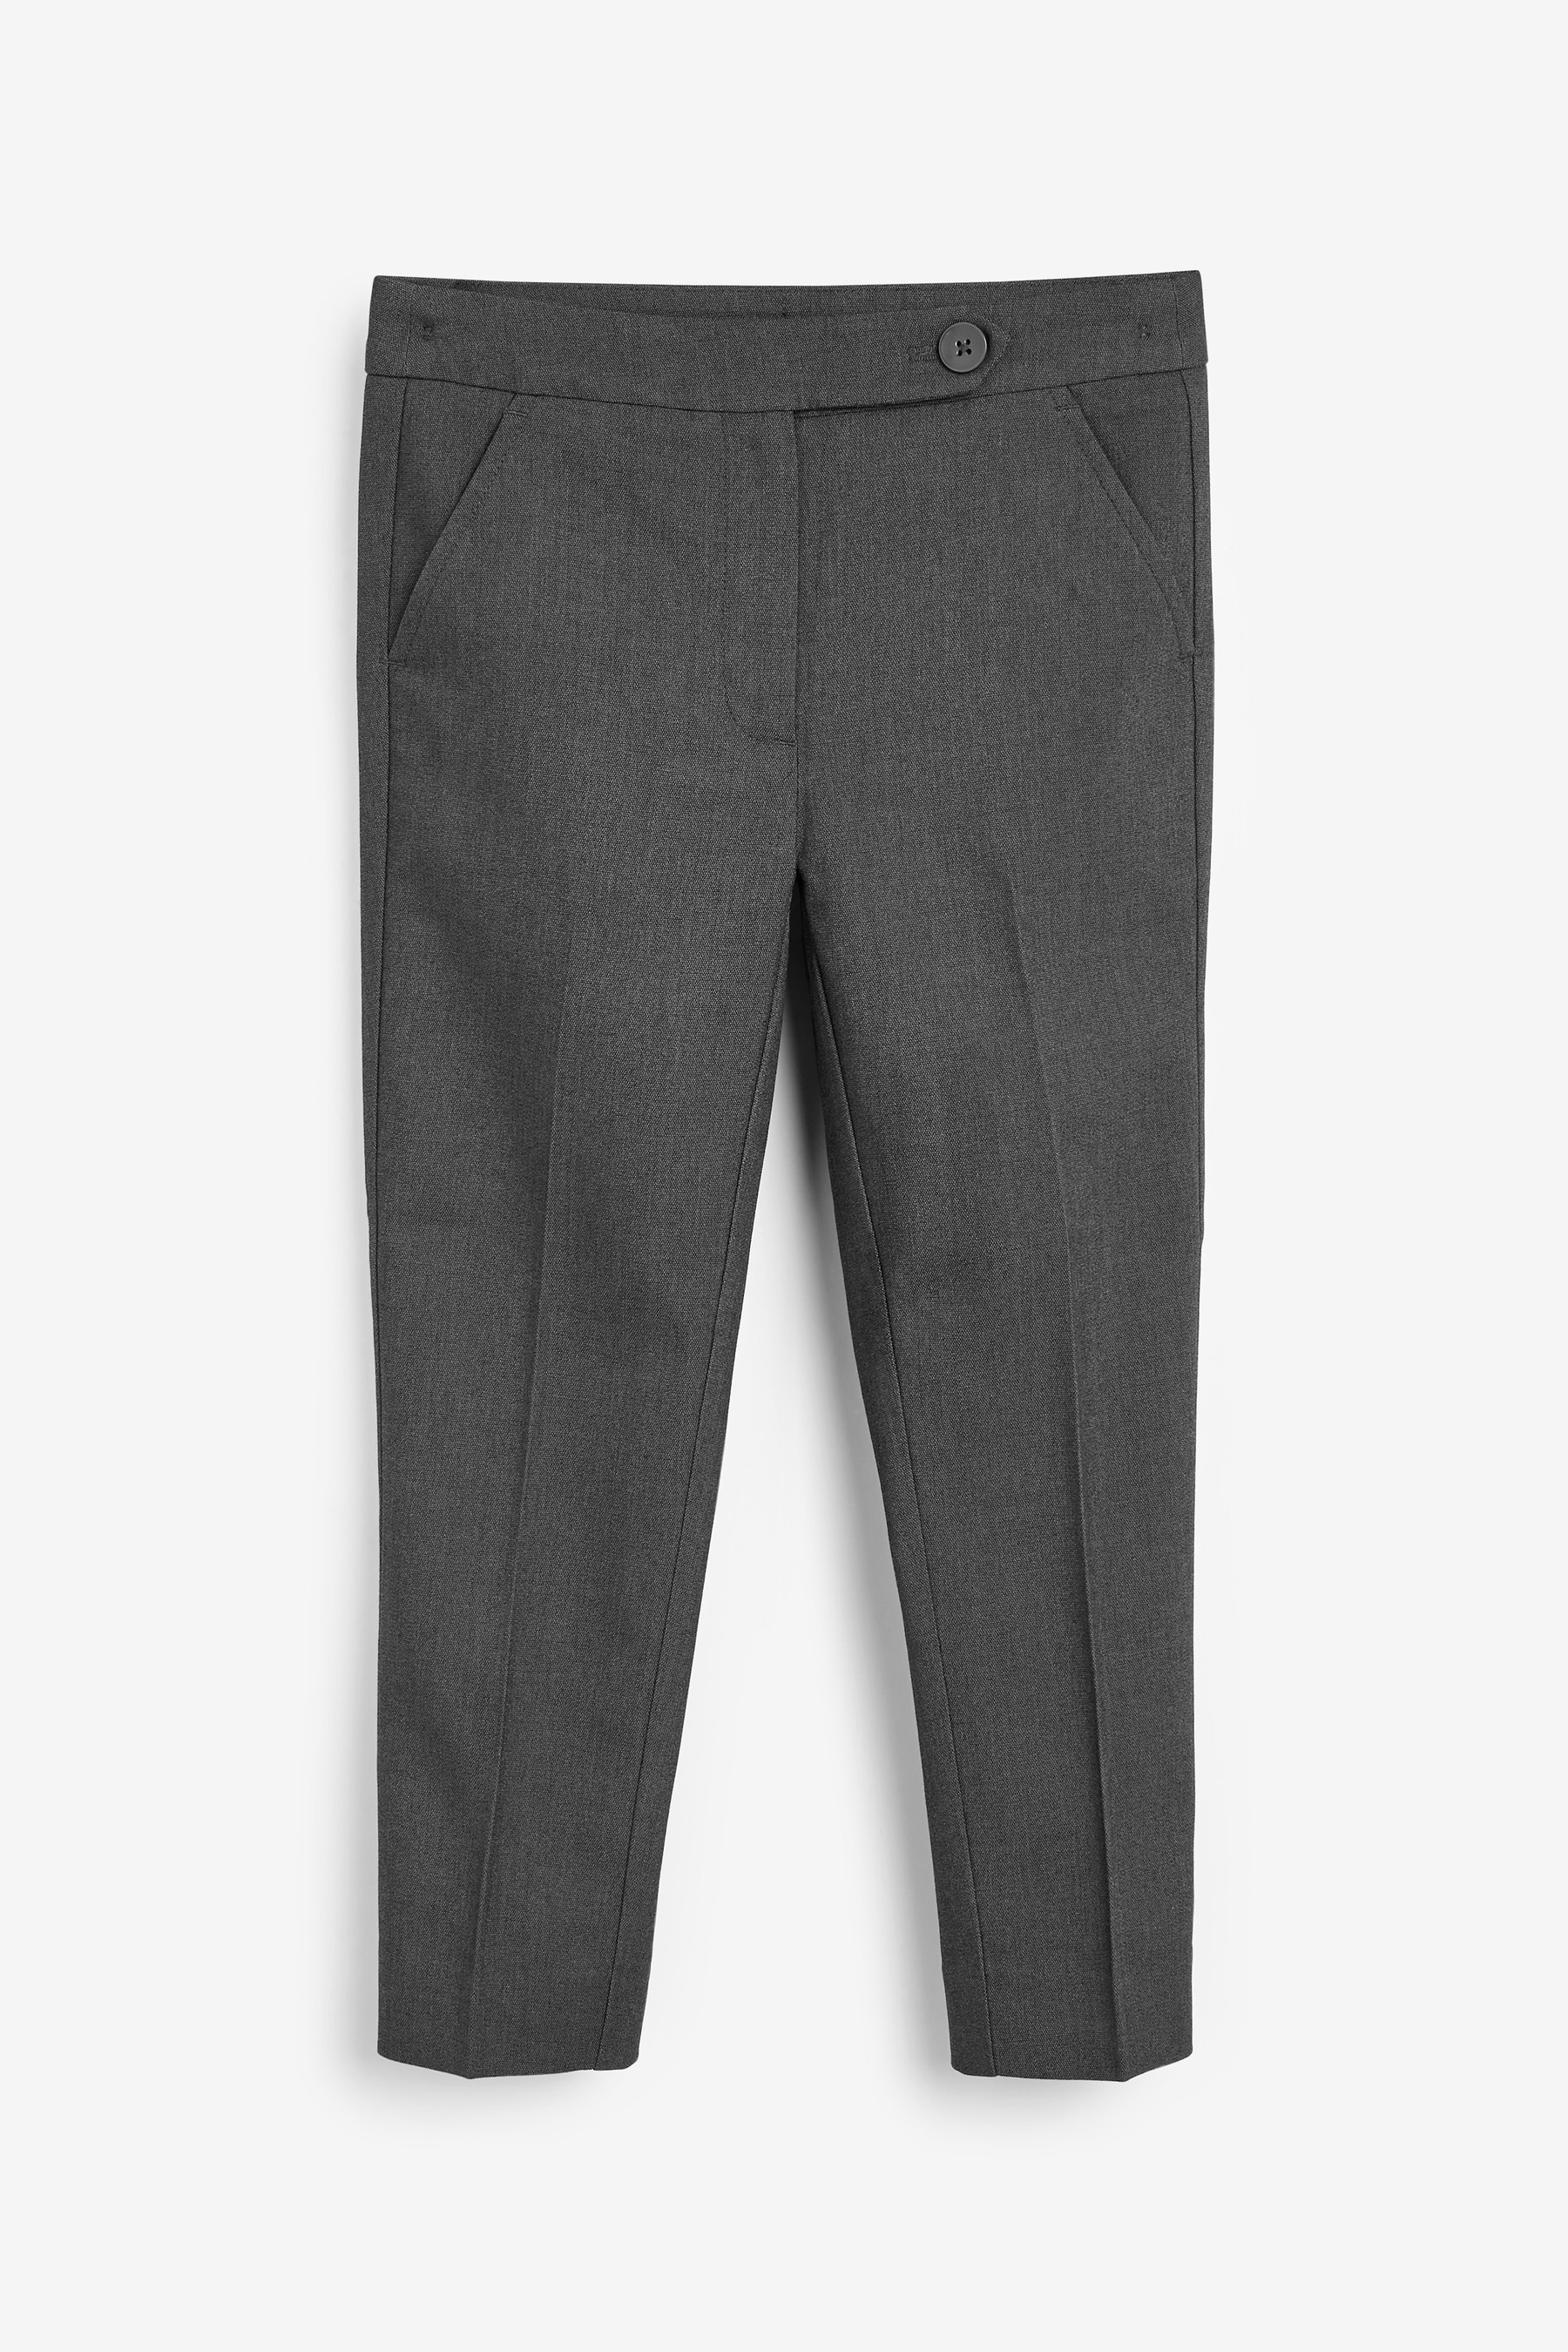 Plain Front School Trousers (3-17yrs)